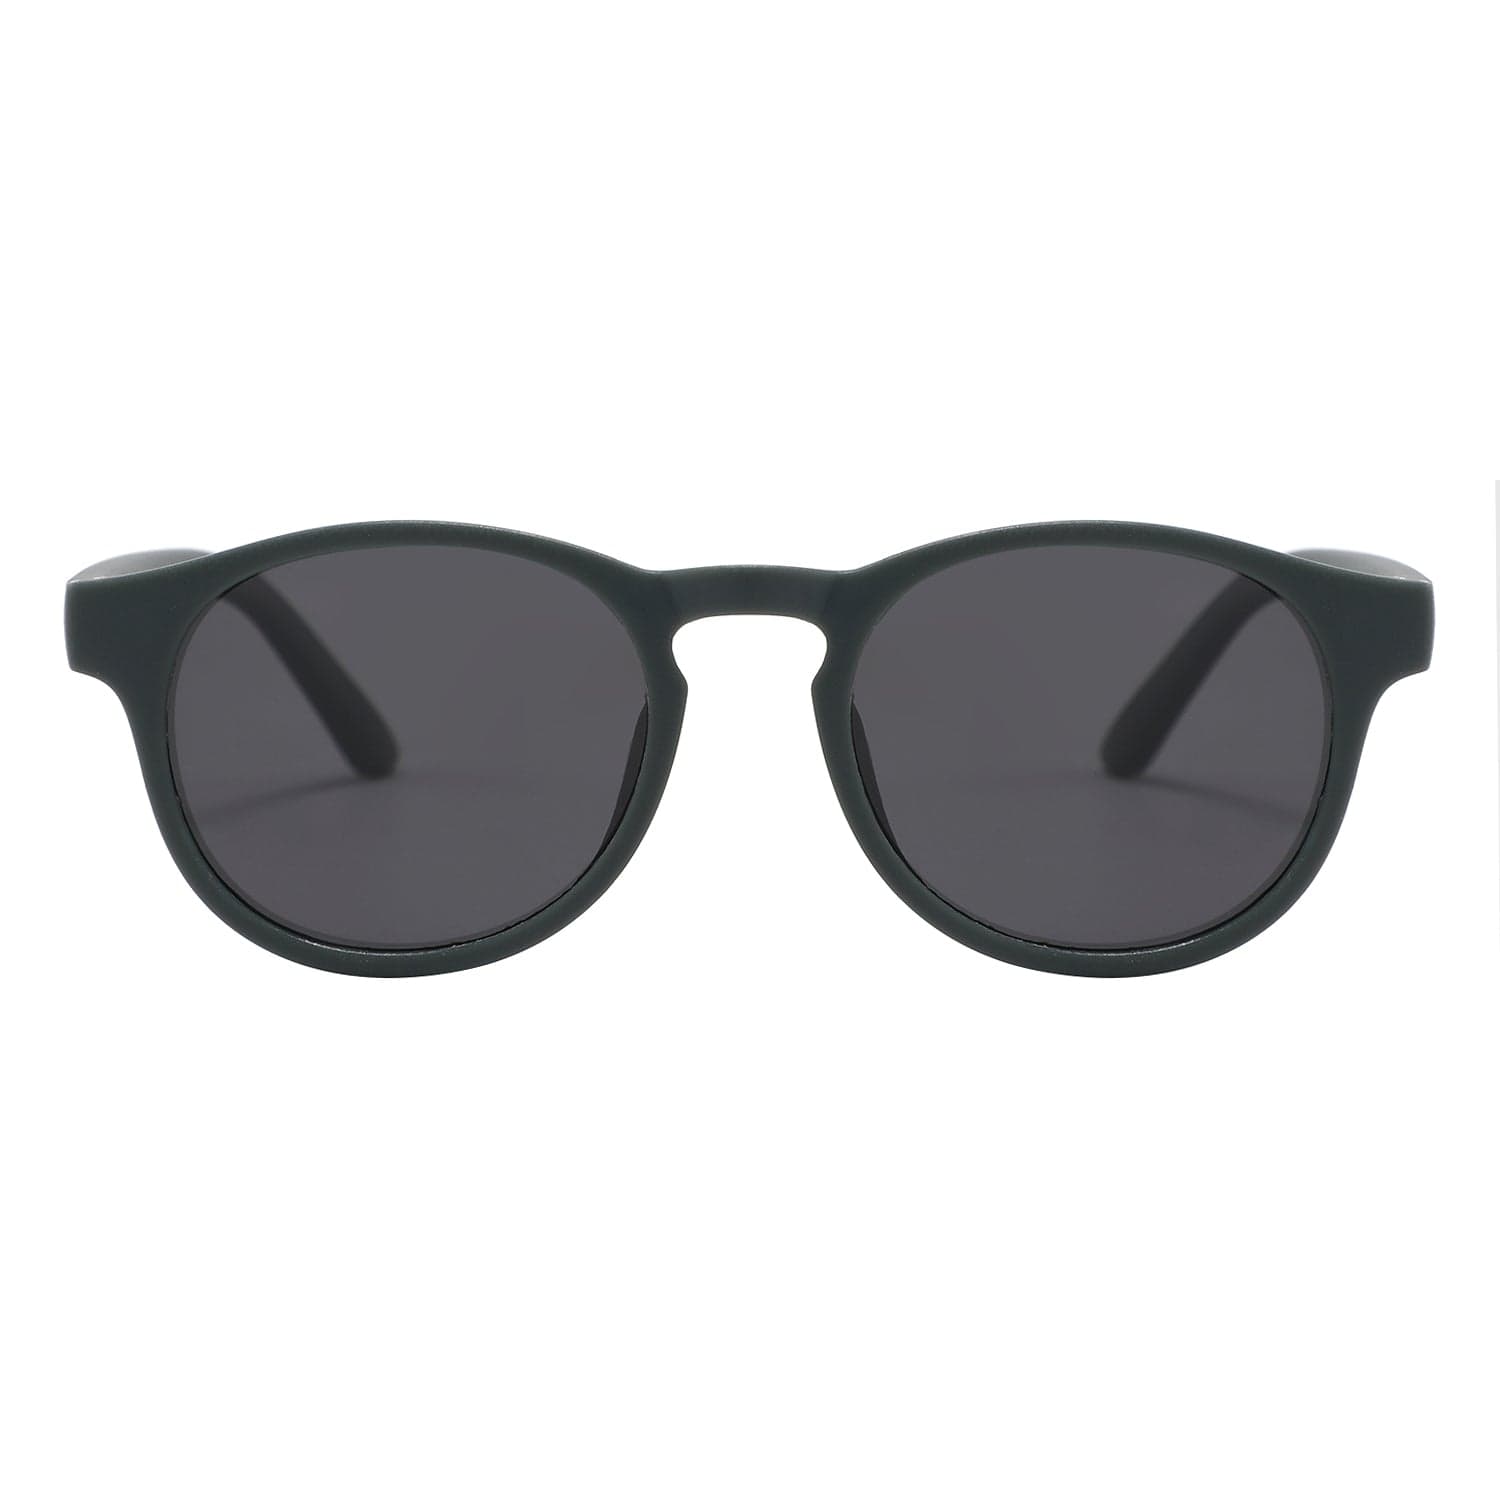 Current Tyed Accessory Sunglasses Matte Charcoal Keyhole Sunnies